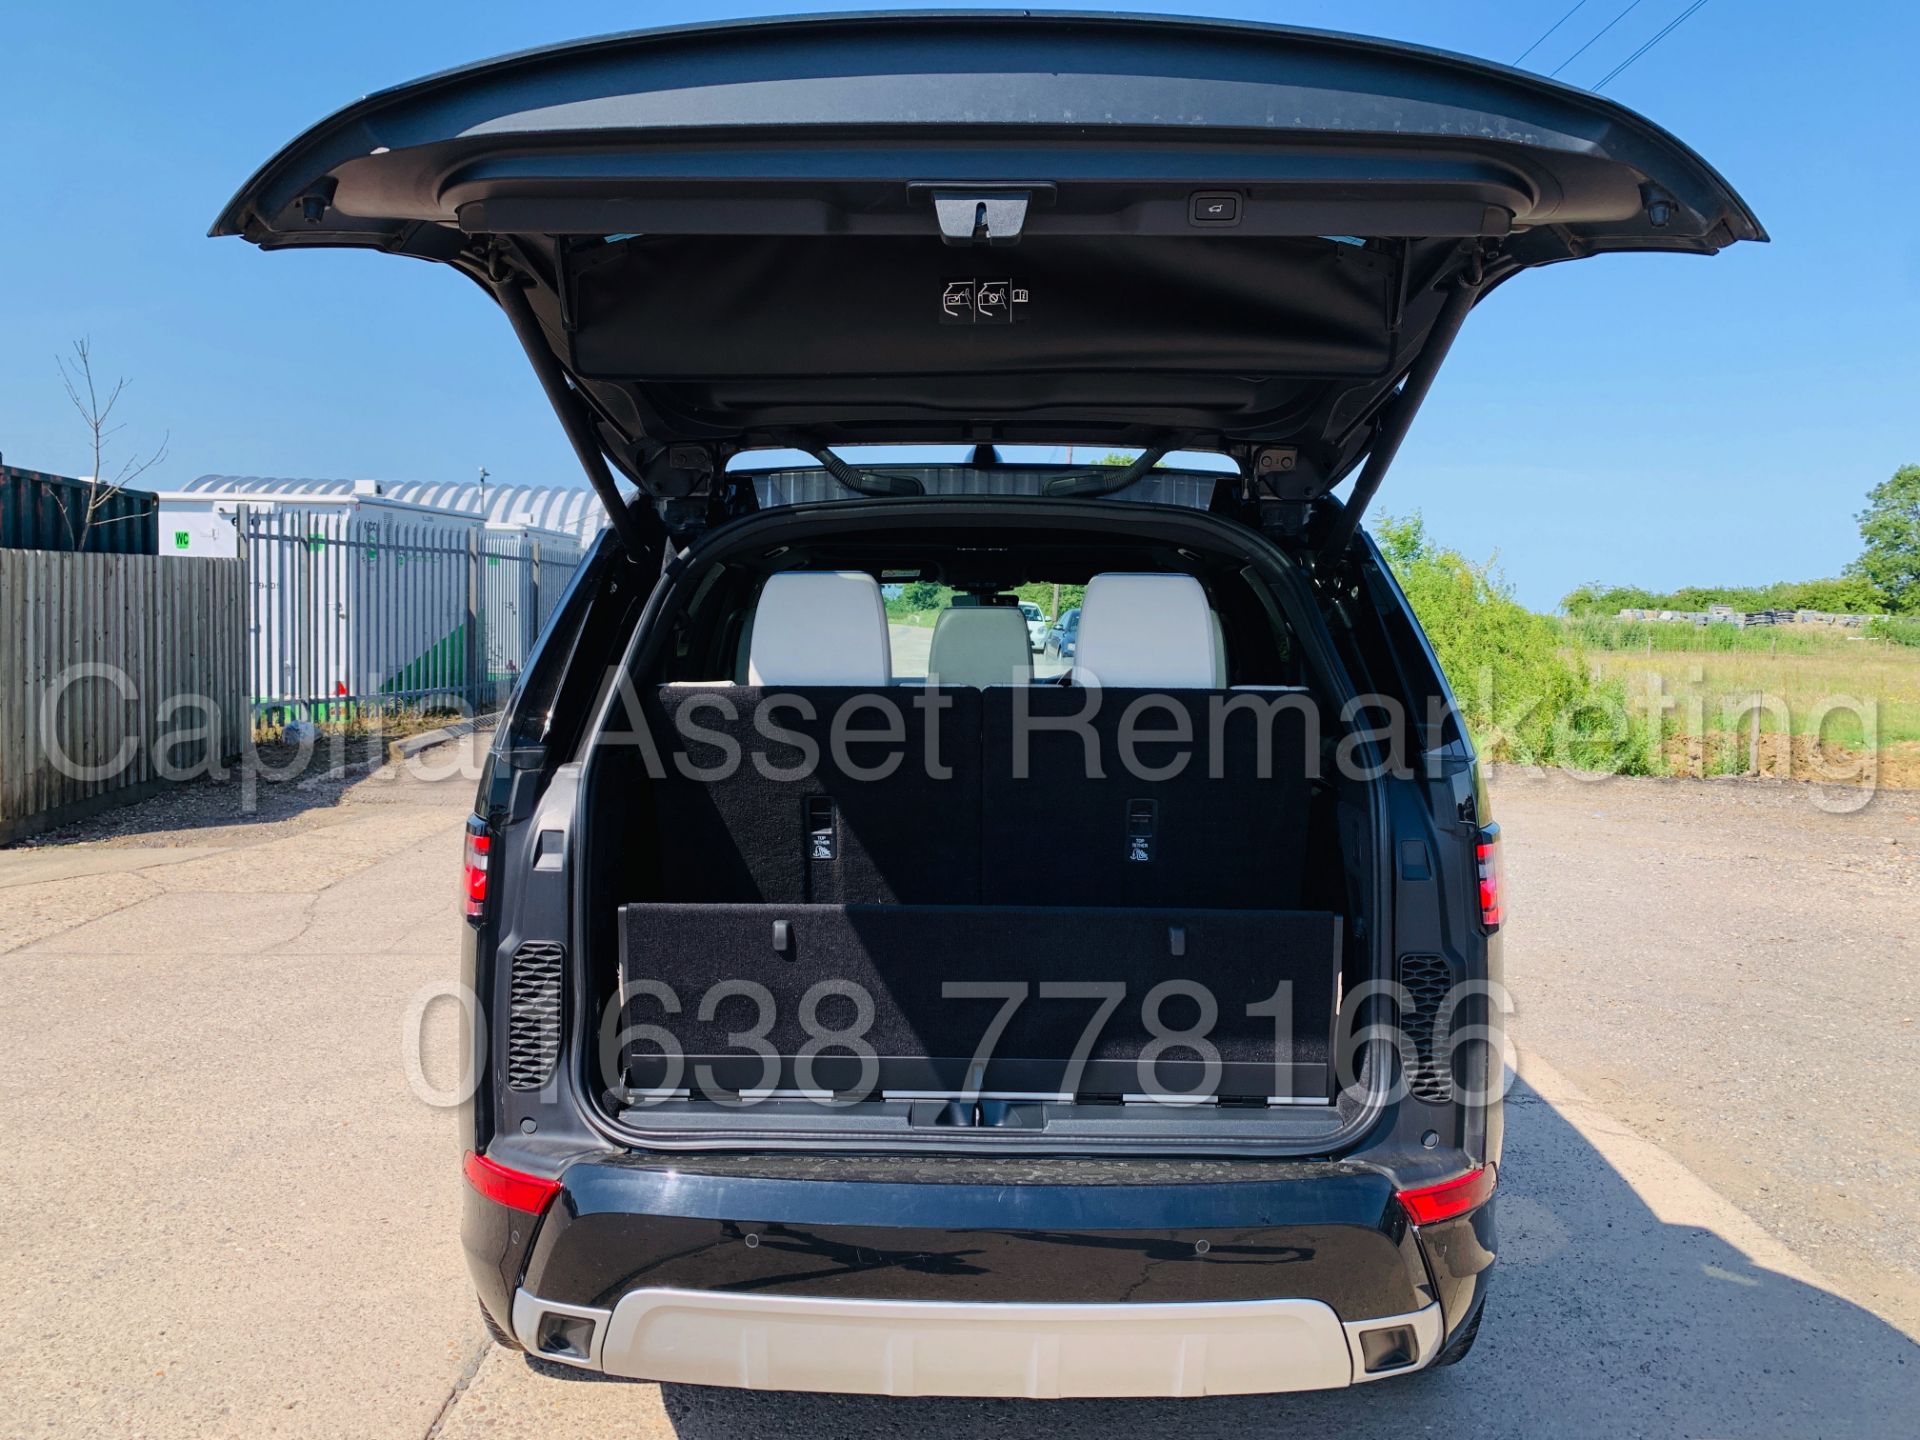 LAND ROVER DISCOVERY *HSE Dynamic* 7 SEATER SUV (2018 - NEW MODEL) '3.0 TD6 - 258 BHP -8 SPEED AUTO' - Image 33 of 68